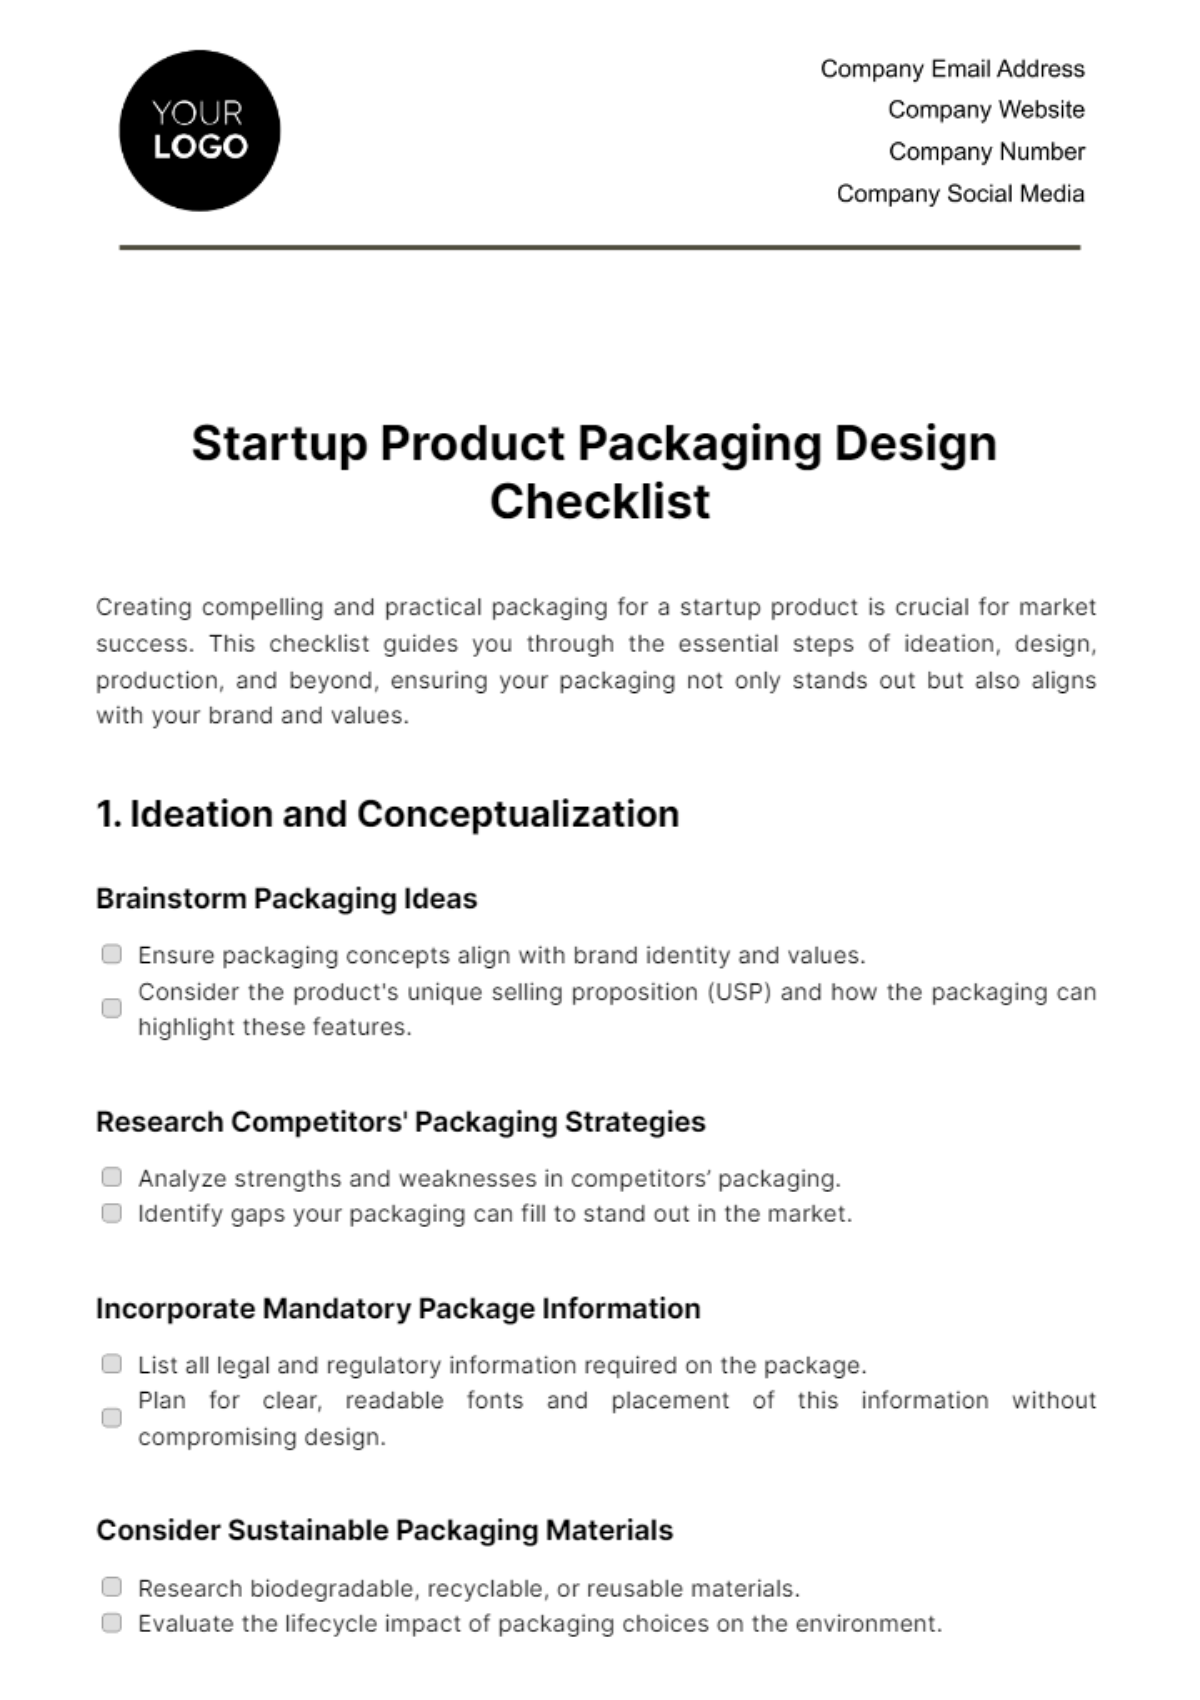 Free Startup Product Packaging Design Checklist Template